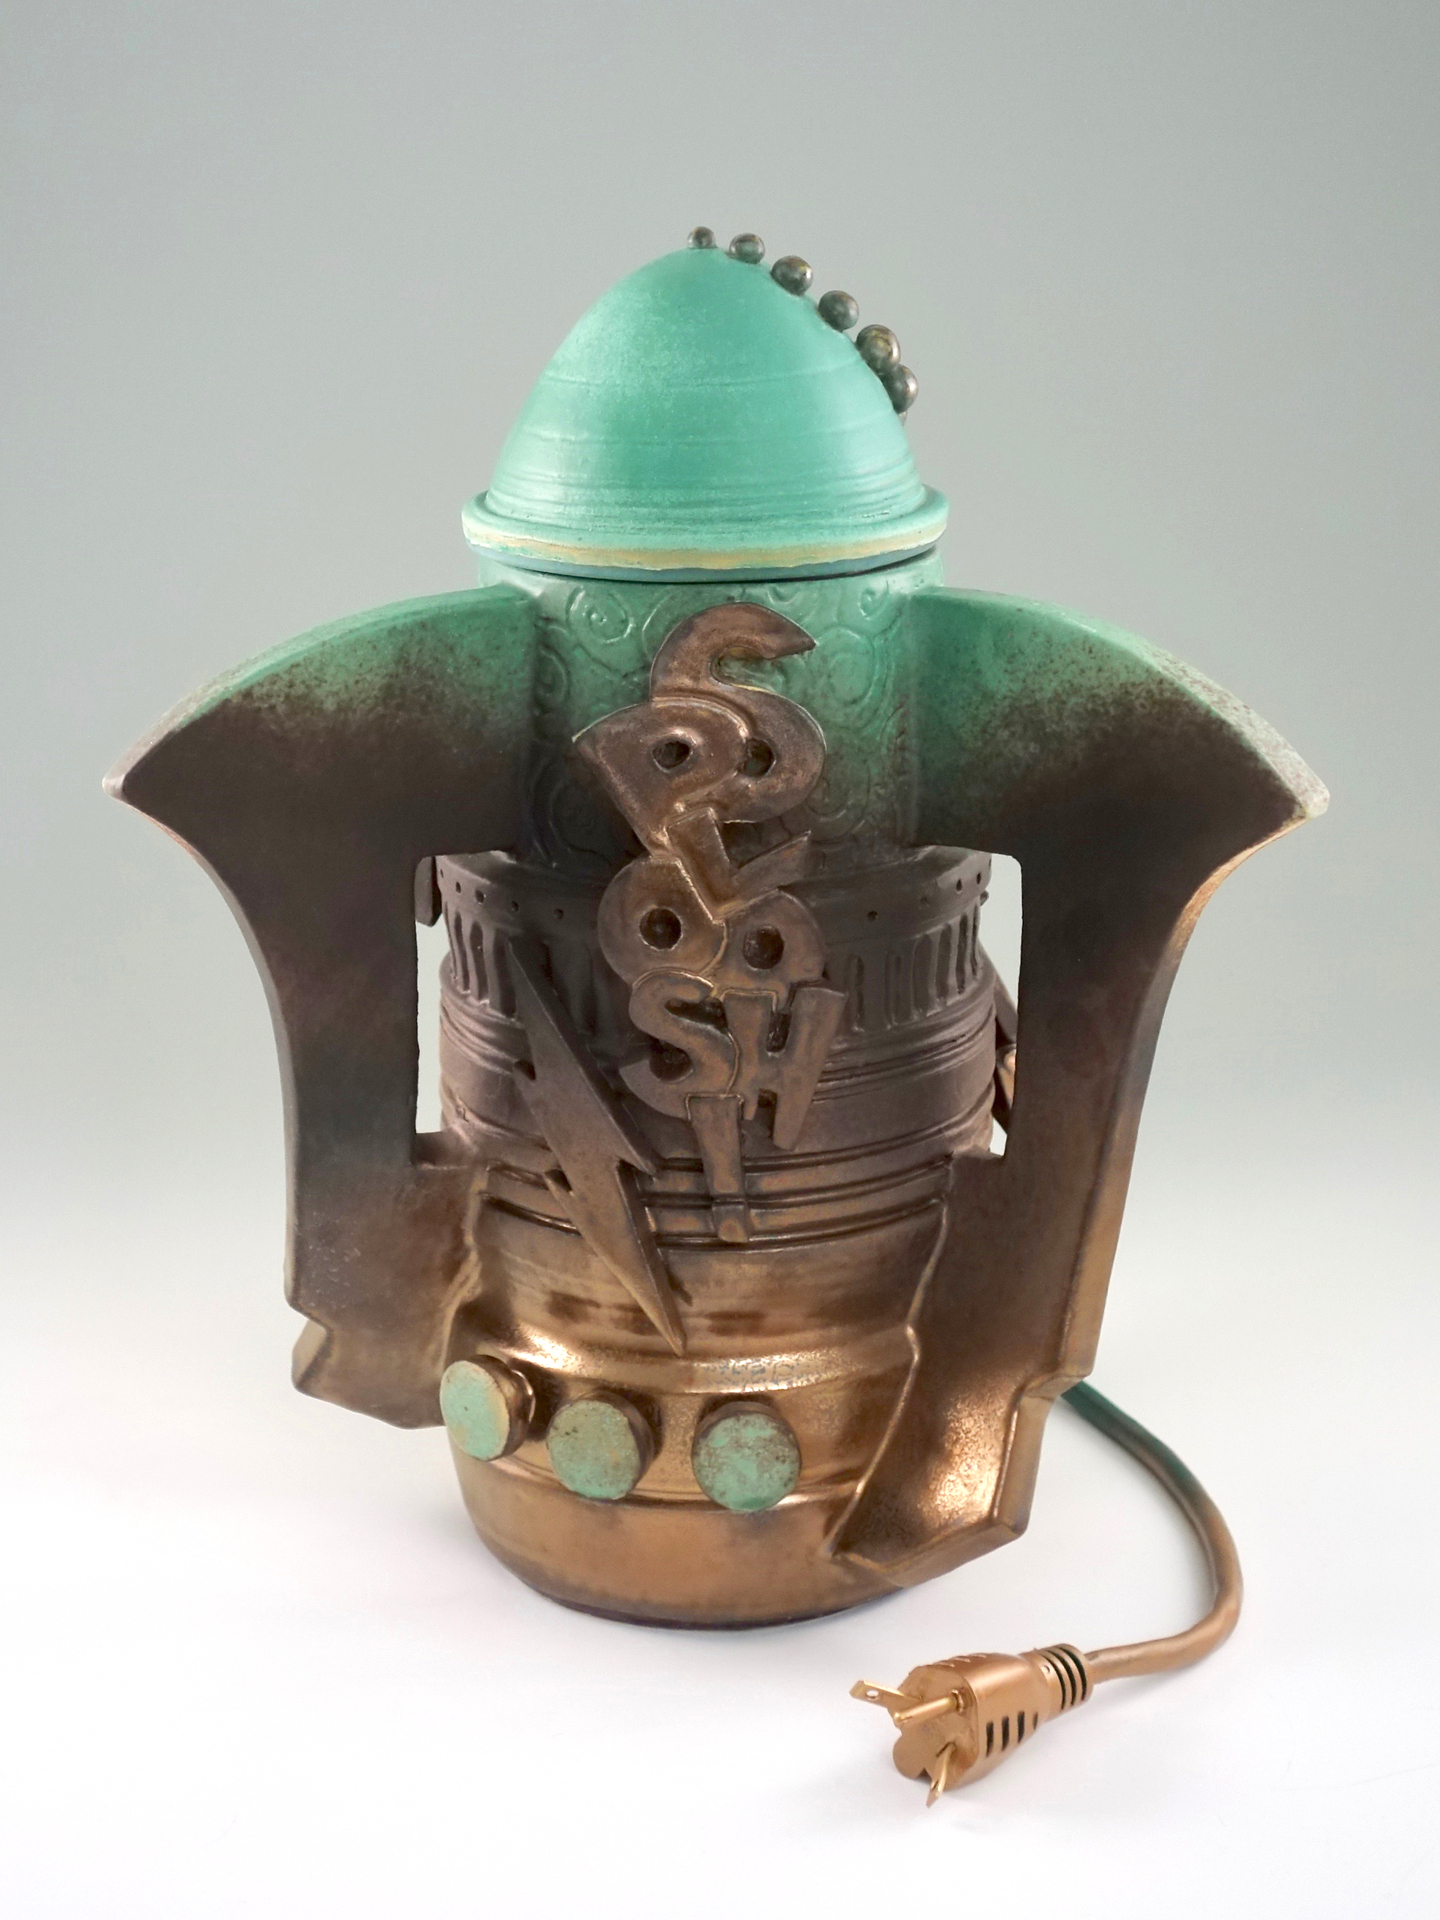 retro futuristic style bronze and mint colored jar that has a wall plug and the word "SPLOOSH" on the front with three mint colored buttons and a lightening strike.